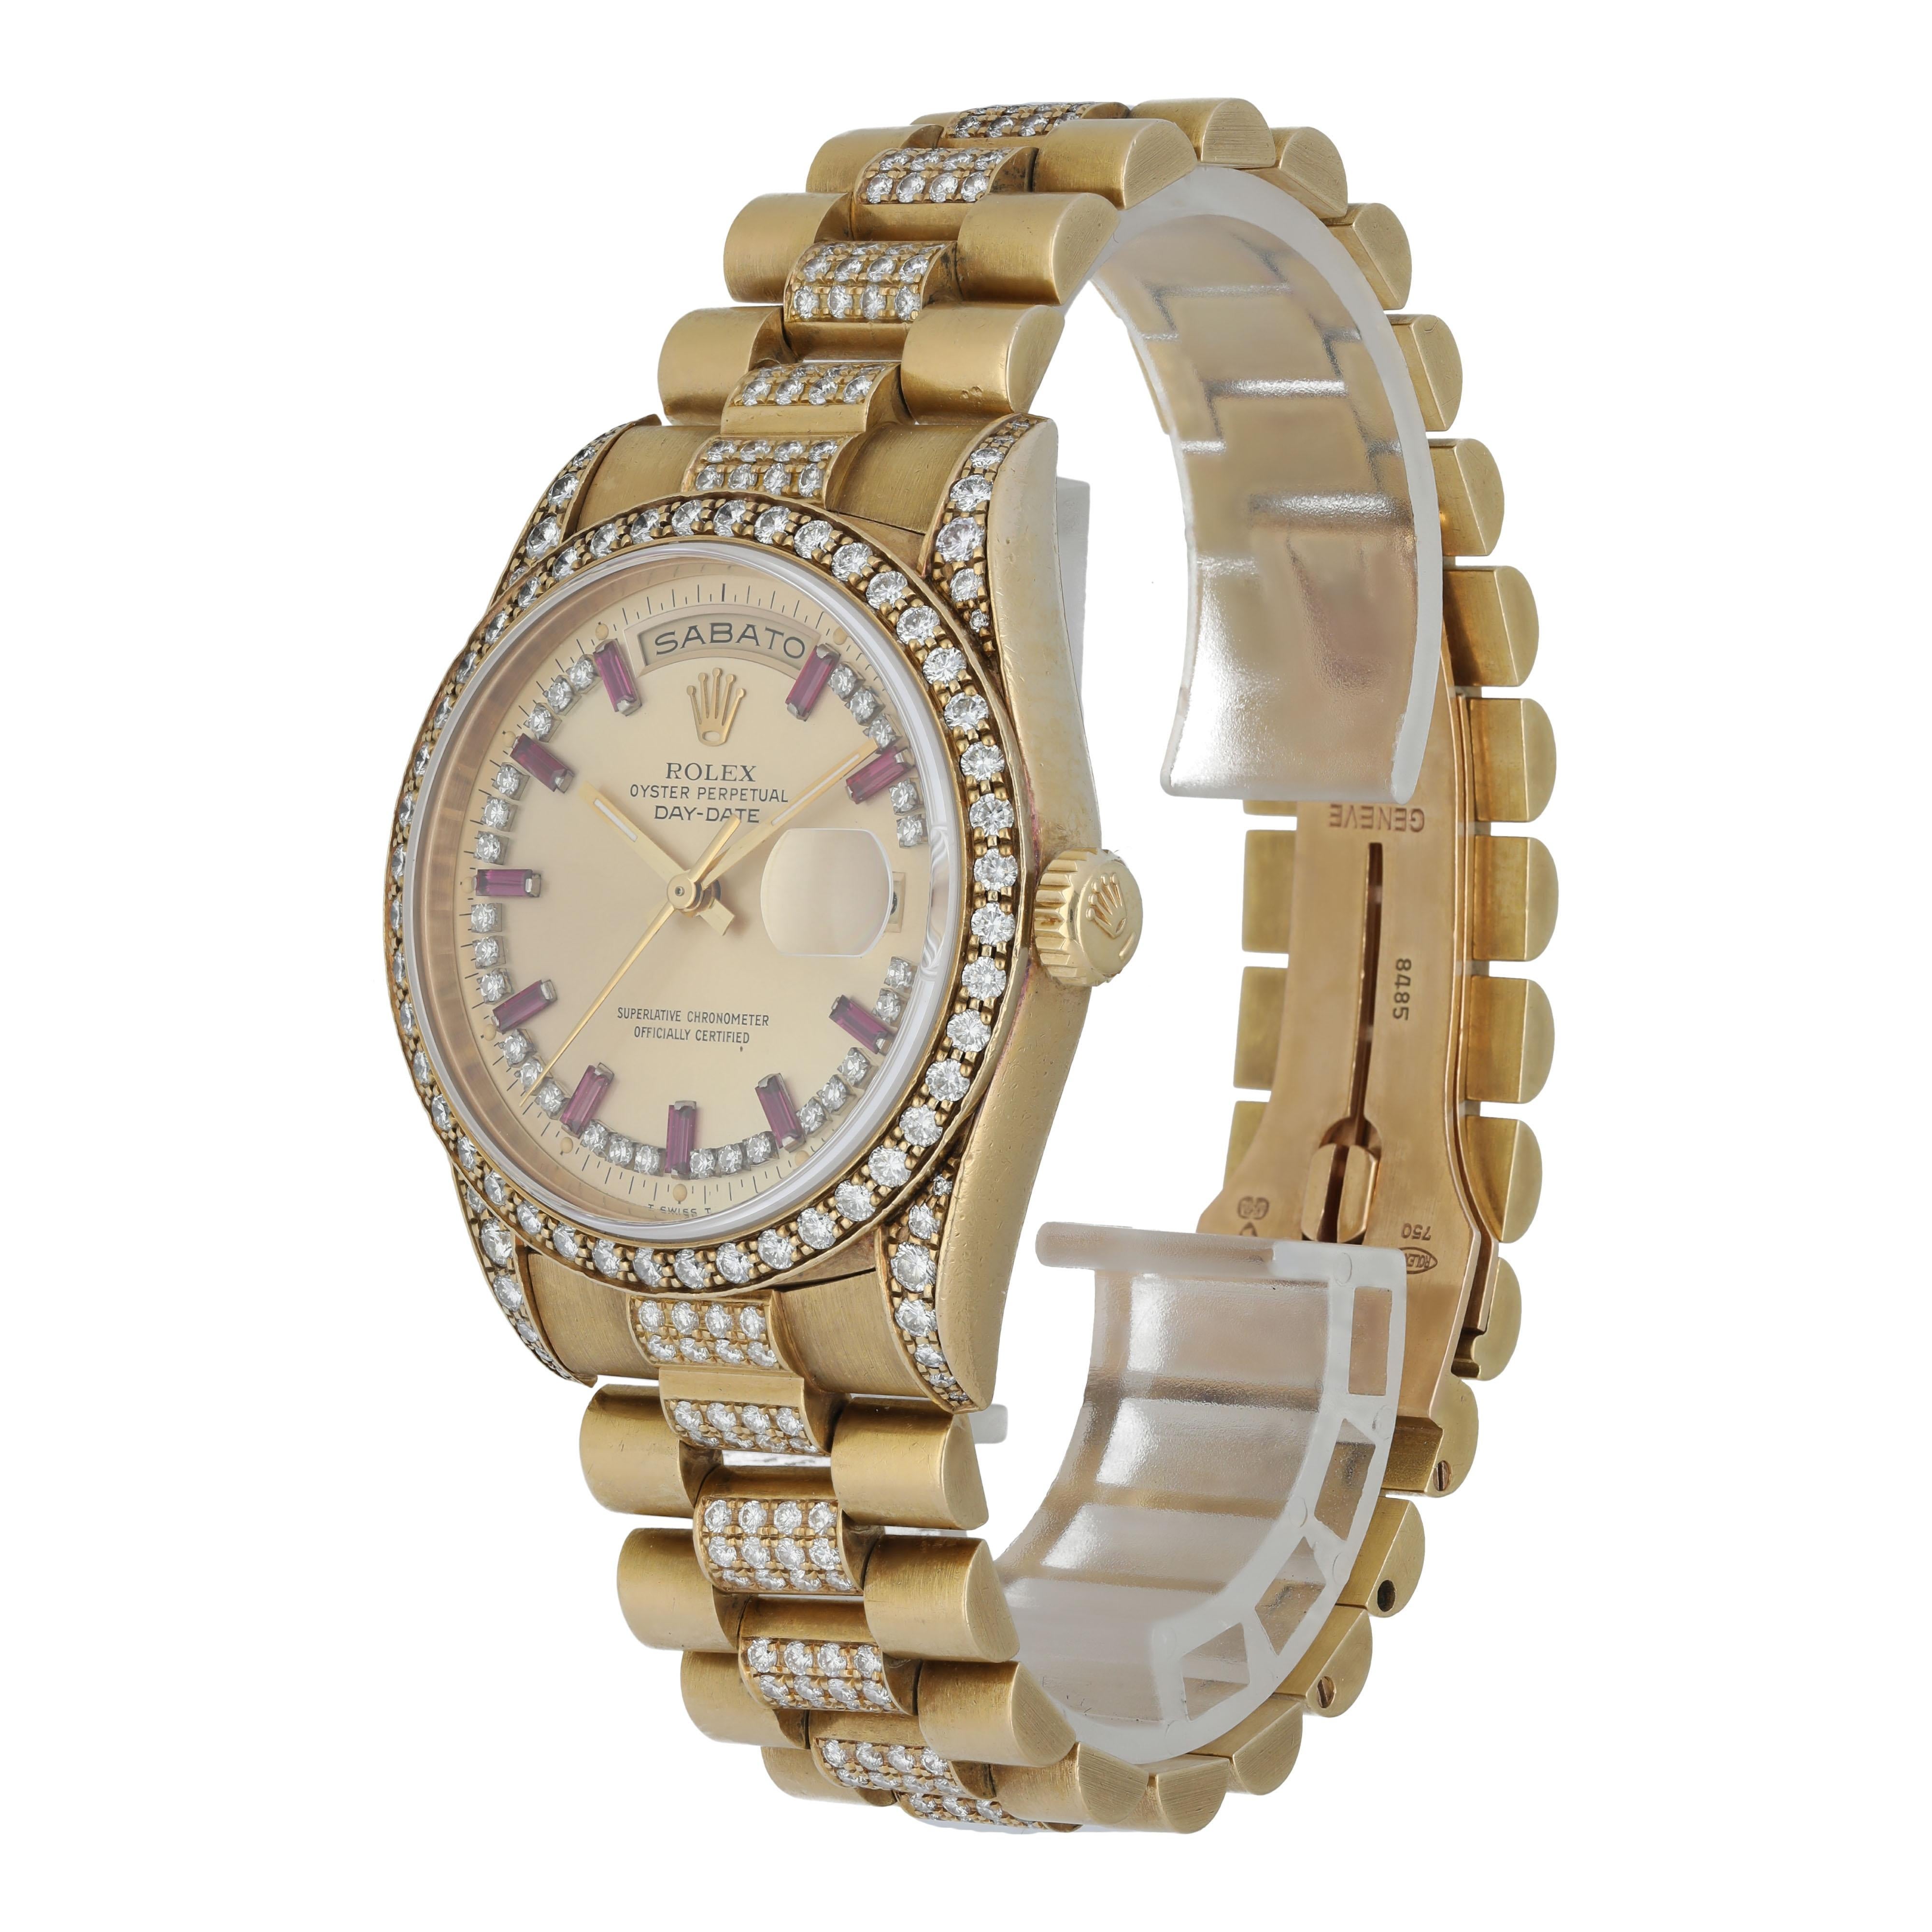 Rolex Day Date 18388 Yellow Gold Diamond Men's Watch In Excellent Condition For Sale In New York, NY